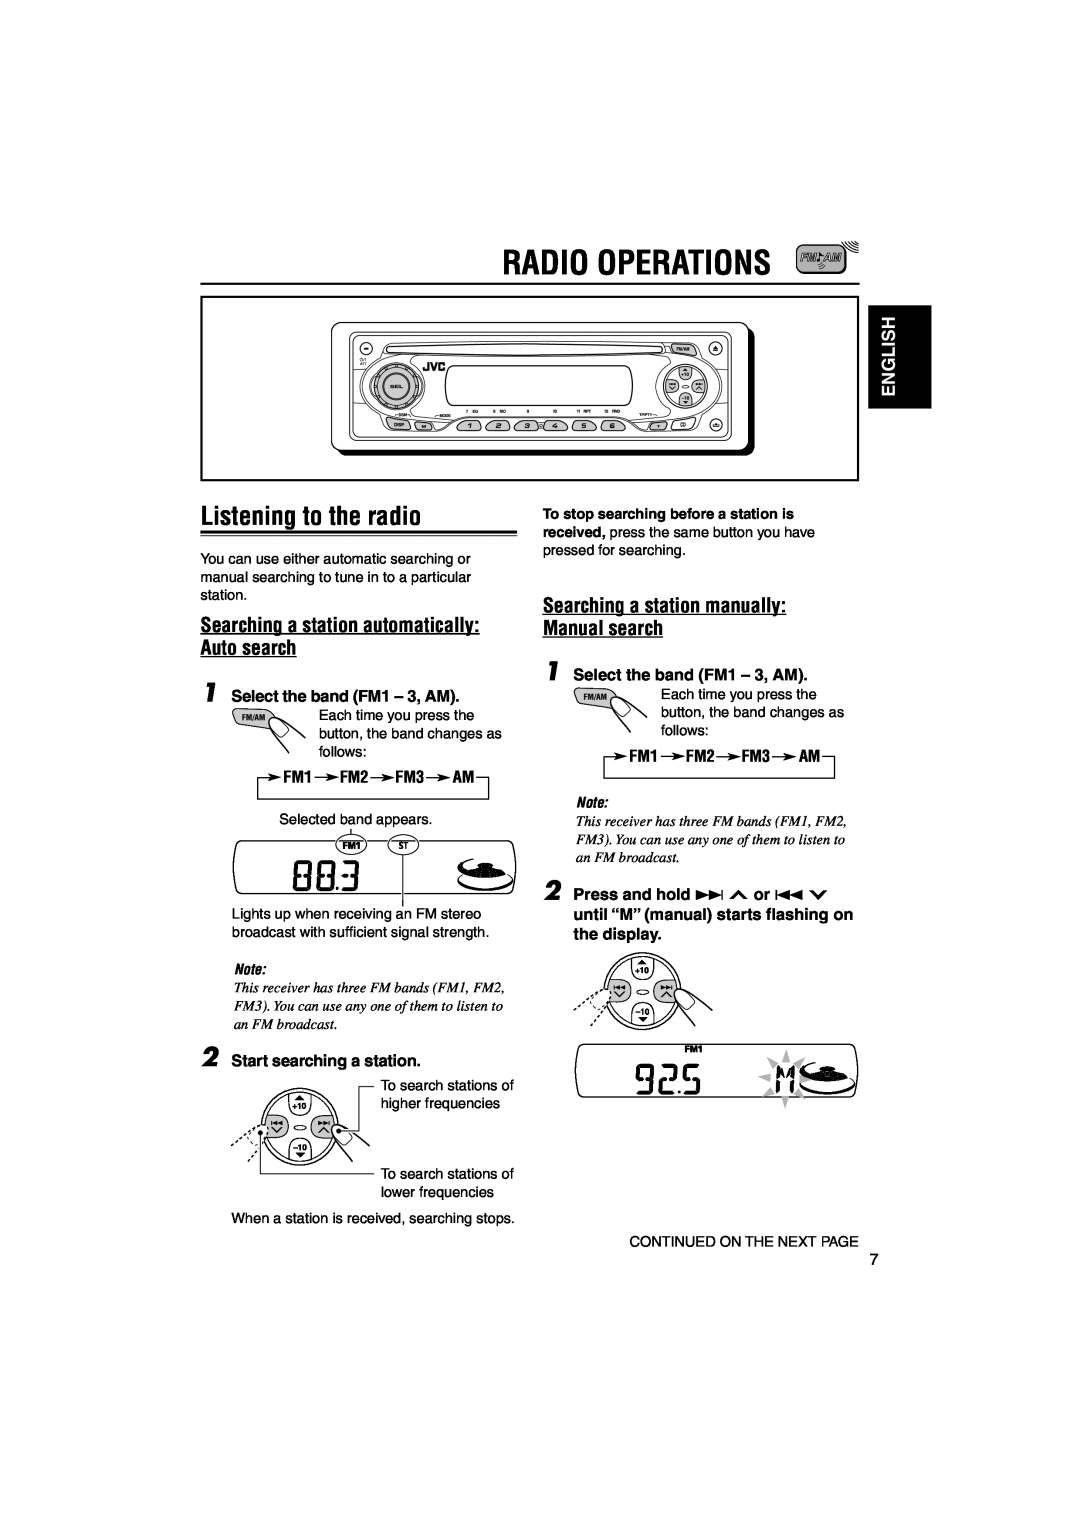 JVC KD-S891R manual Radio Operations, Listening to the radio, Searching a station automatically Auto search, English 